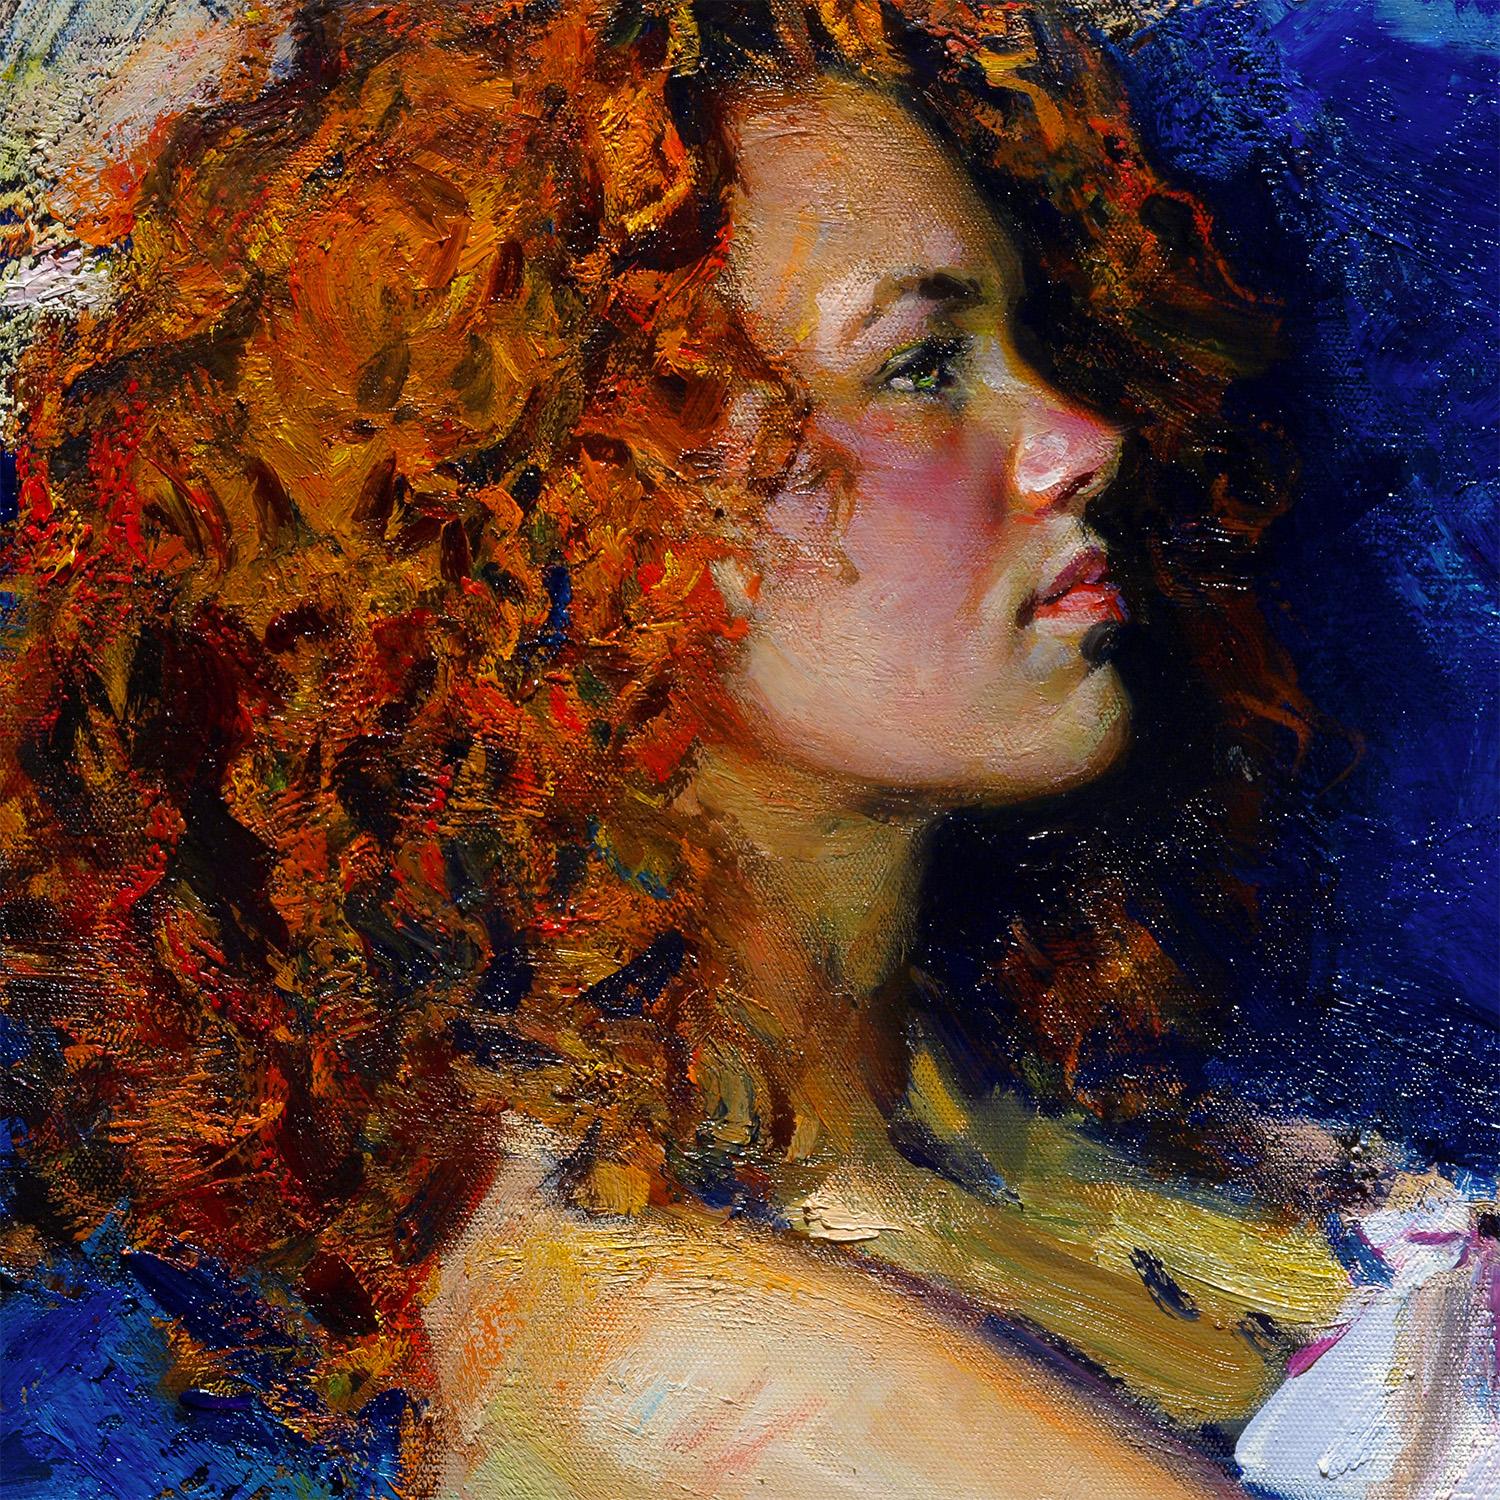 The dreamer - Painting by Evgeniy Monahov